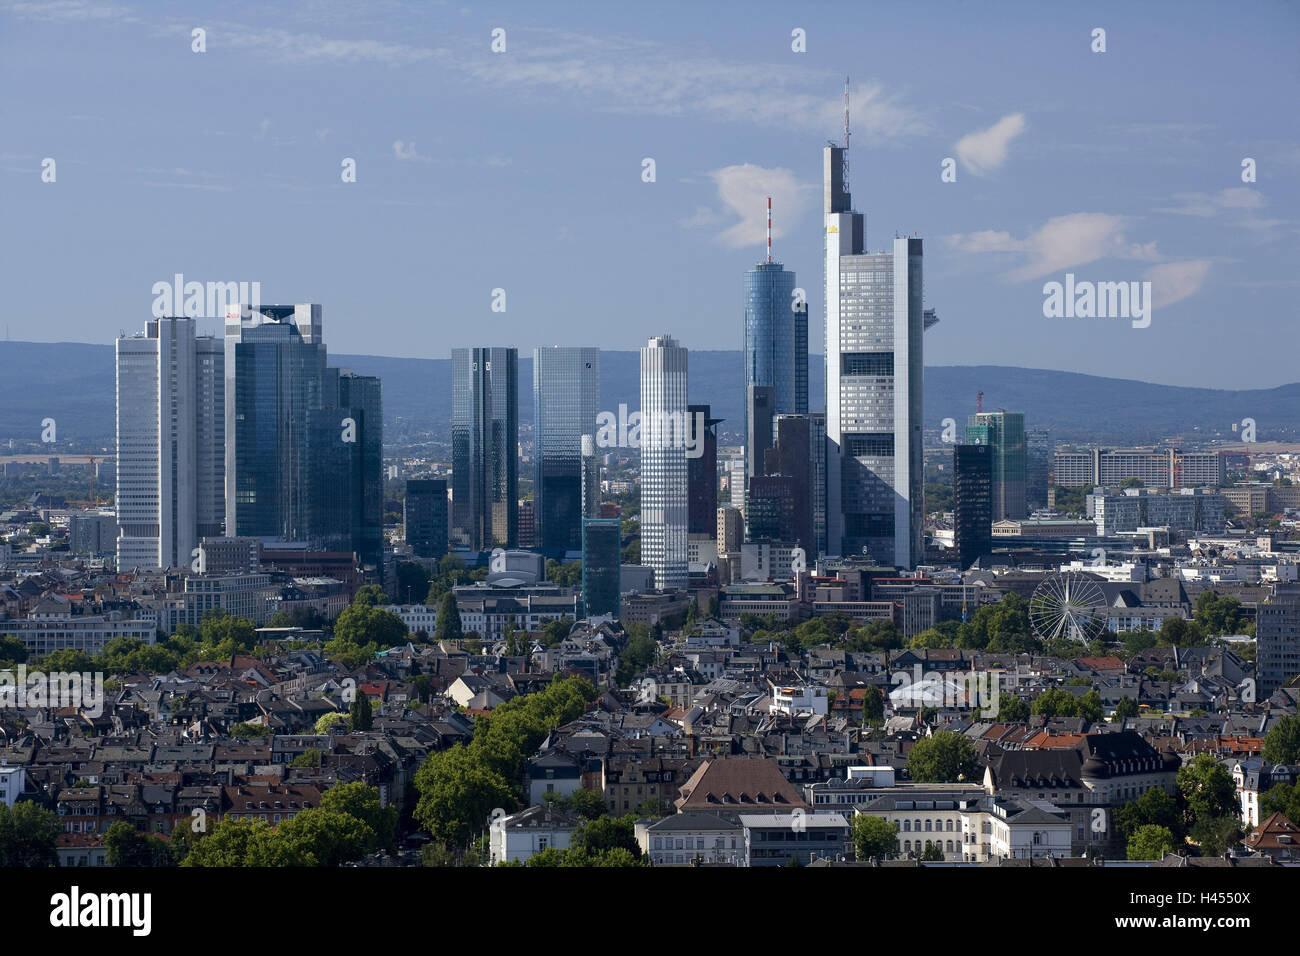 Germany, Hessen, Frankfurt on the Main, town view, skyline, town, city, metropolis, financial metropolis, architecture, houses, buildings, high rises, high-rise office blocks, office buildings, outside, residential houses, urban, urbane, Stock Photo